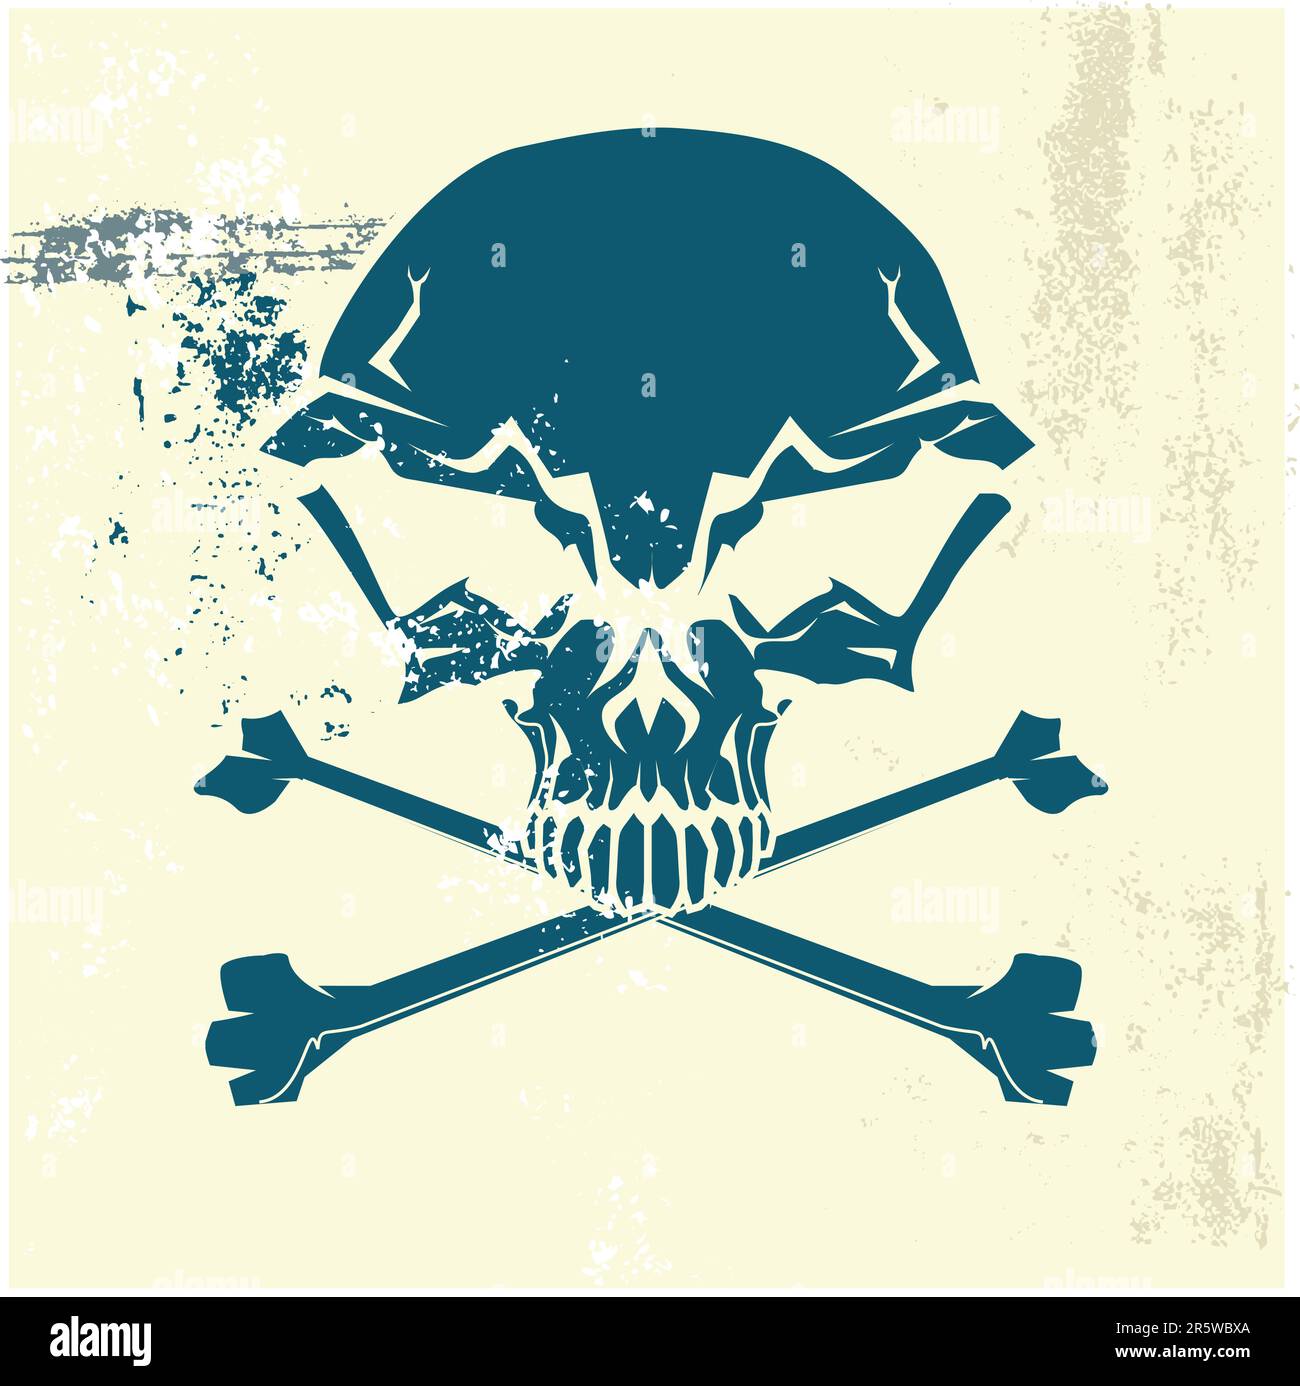 Stylized human skull and bones symbol. Grunge background. Can be used as danger or warning sign. Vector illustration. Stock Vector